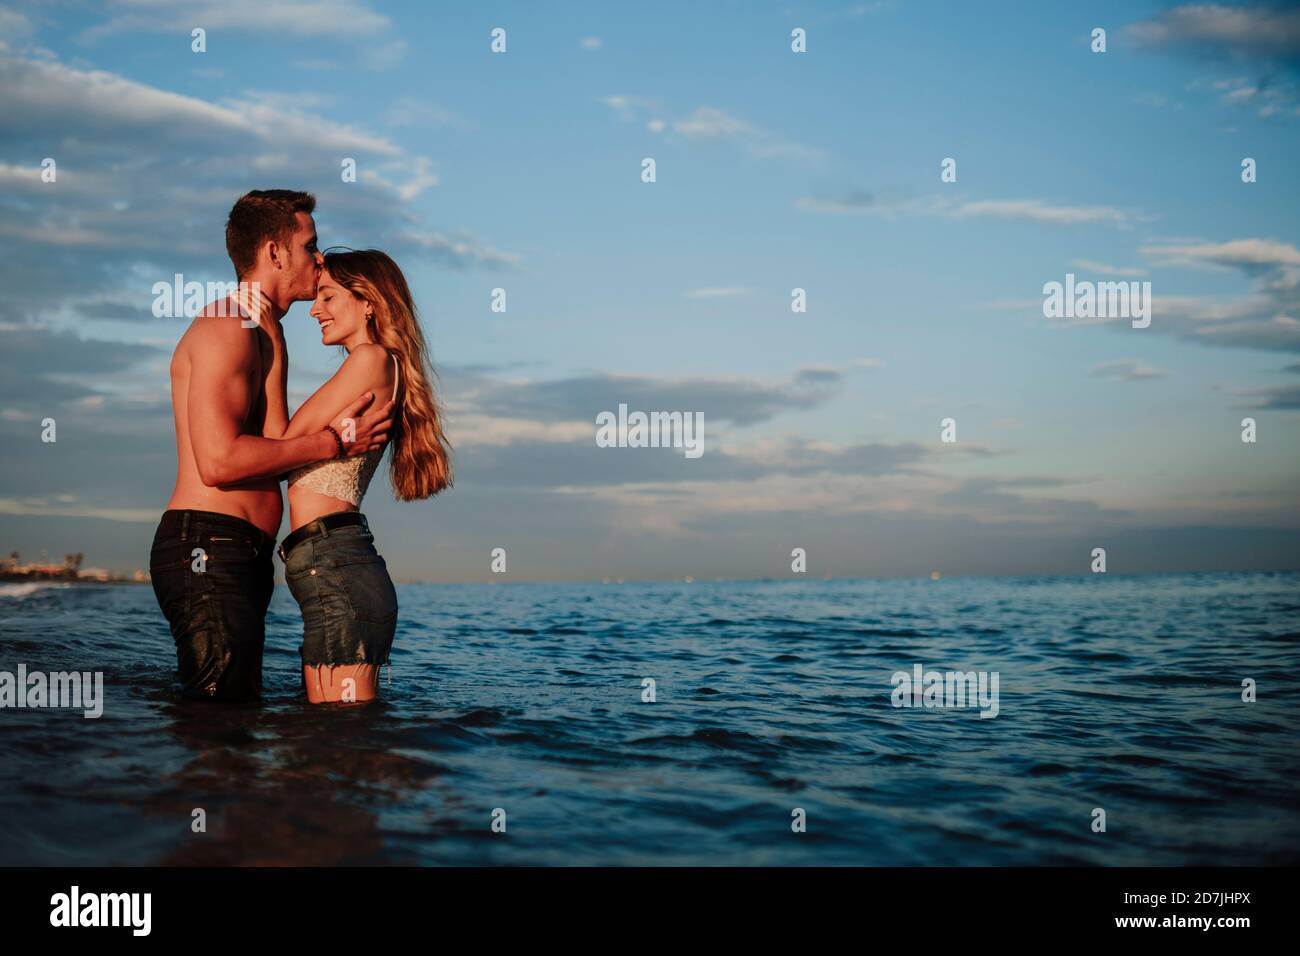 Boyfriend kissing girlfriend while standing in water at beach Stock Photo